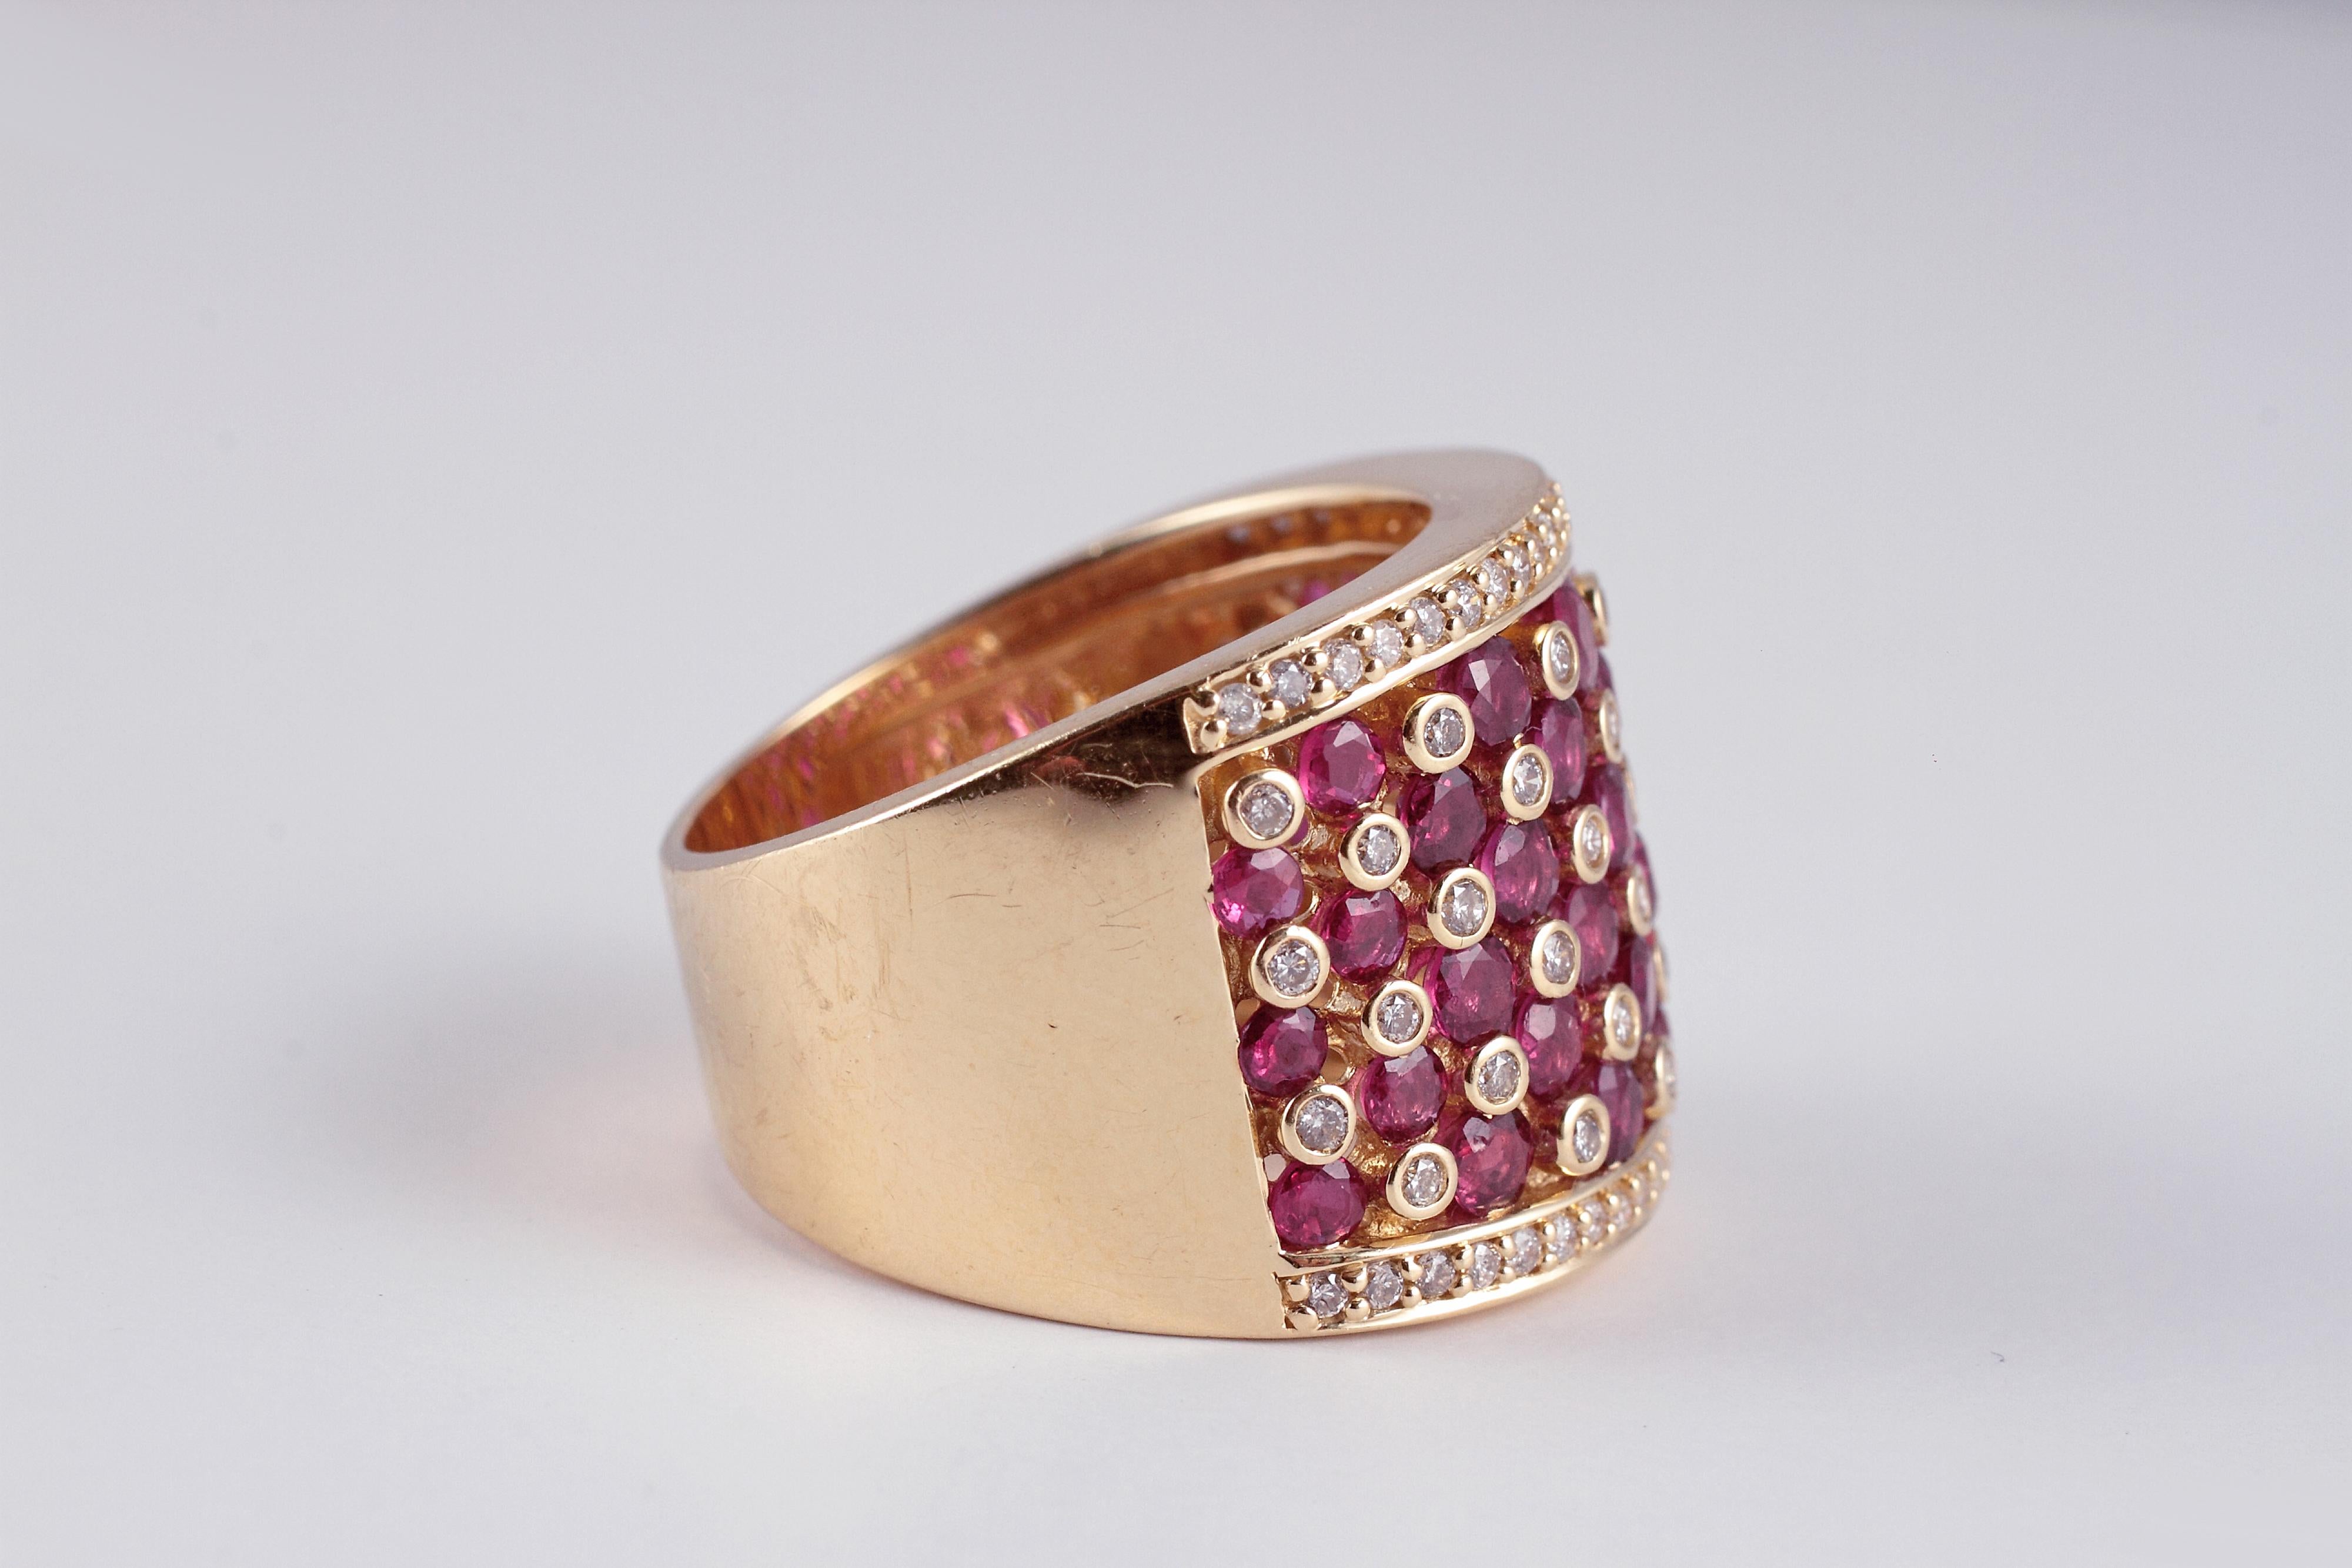 You won't believe how comfortable this ring is! In 14 karat yellow gold by Effy, with rubies and accent diamonds, this striking ring is a size 7 3/4 and measures 0.62